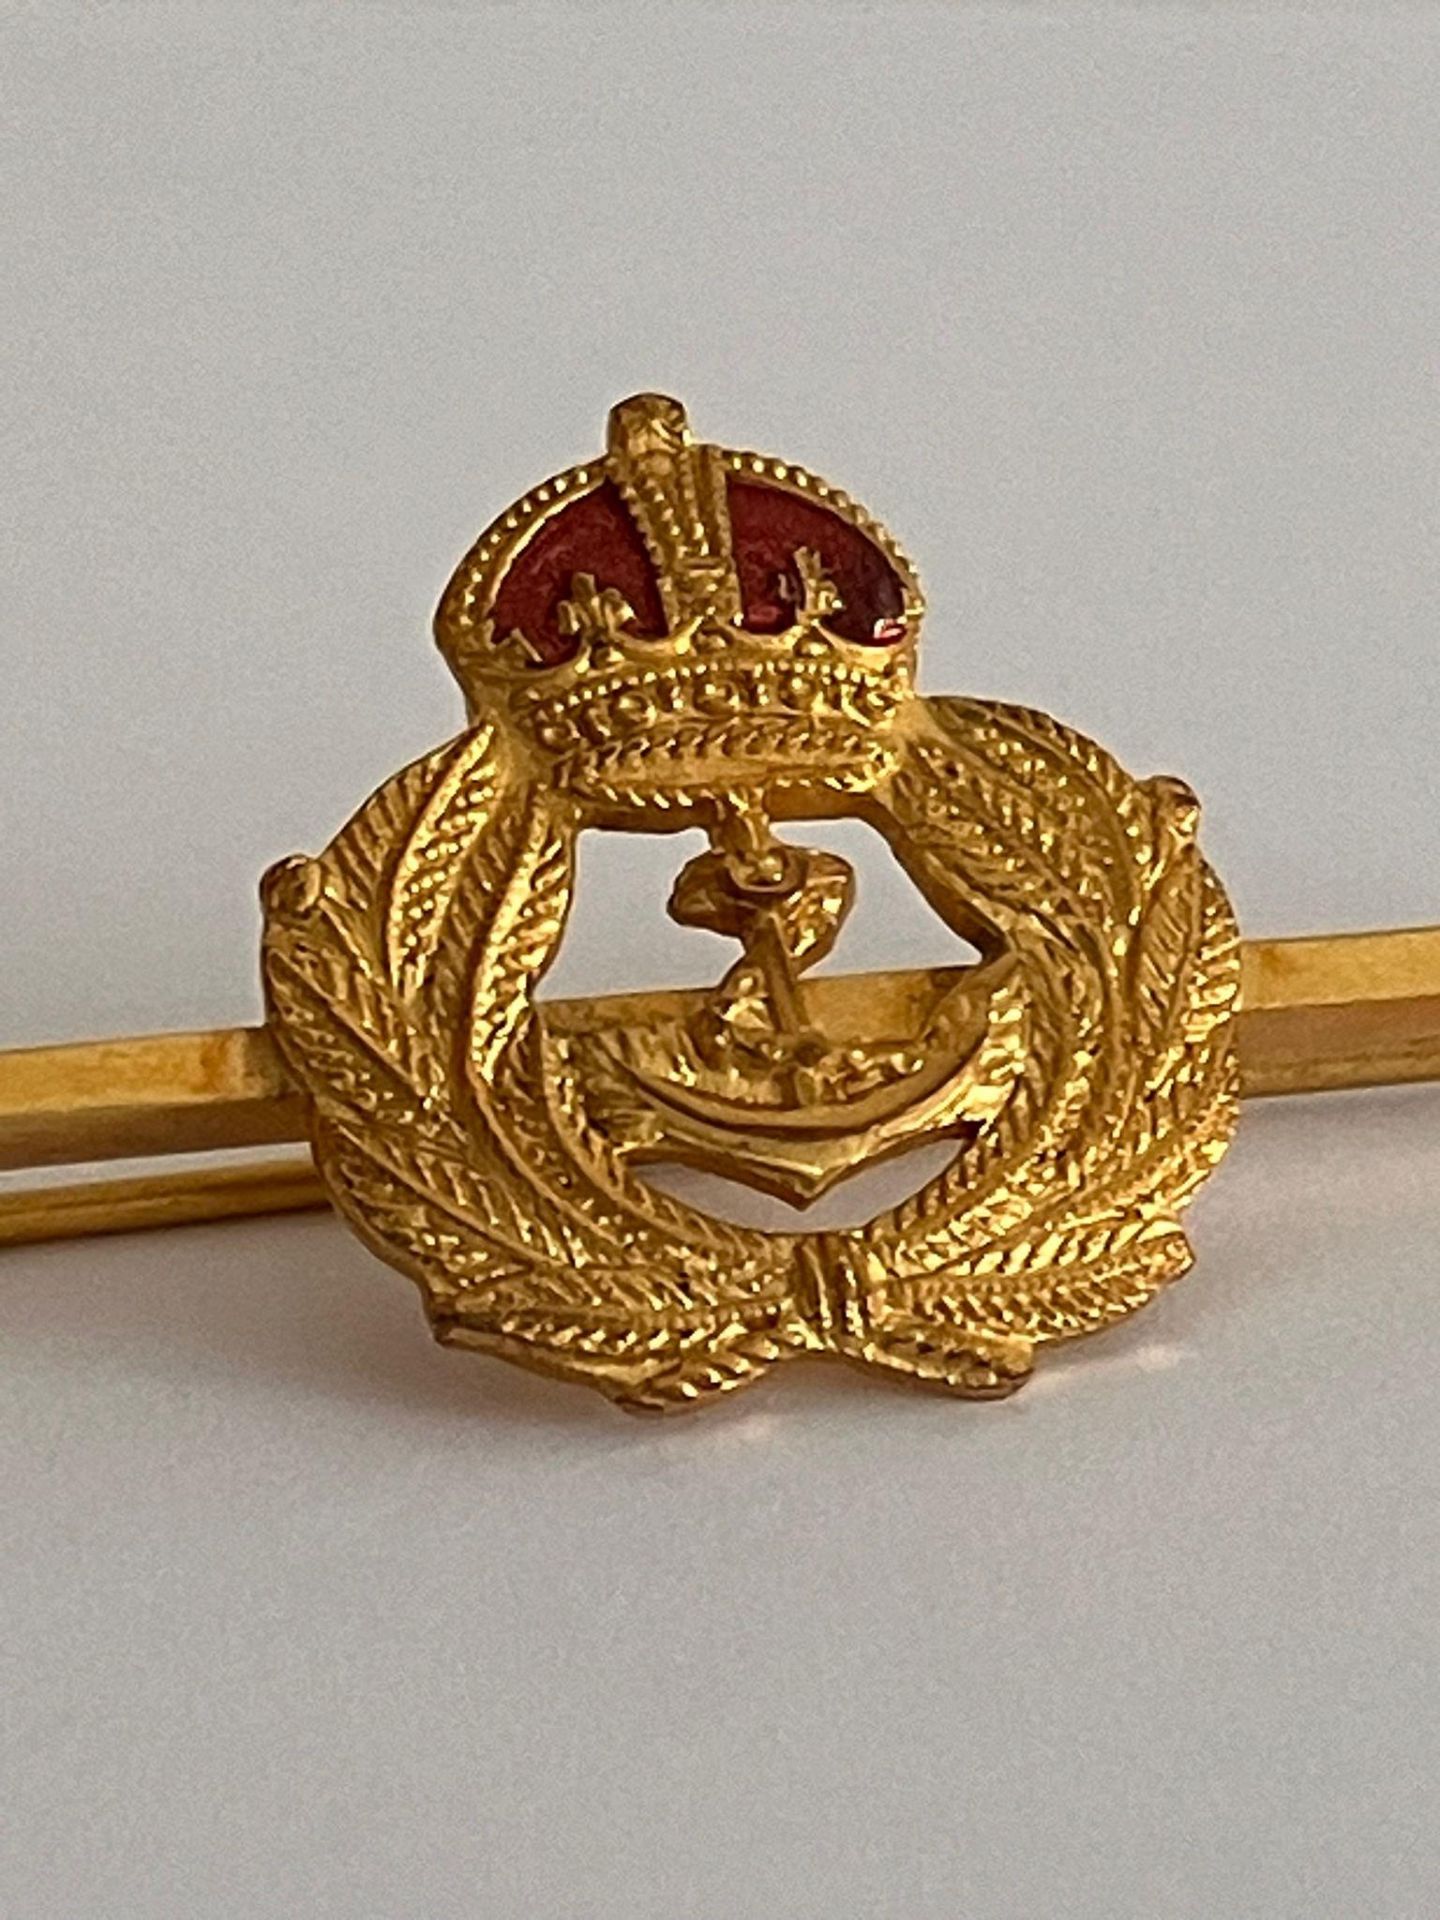 Rare World War I ROYAL NAVY SWEETHEART BROOCH. Gold Plated with red enamel detail. Excellent - Image 2 of 3